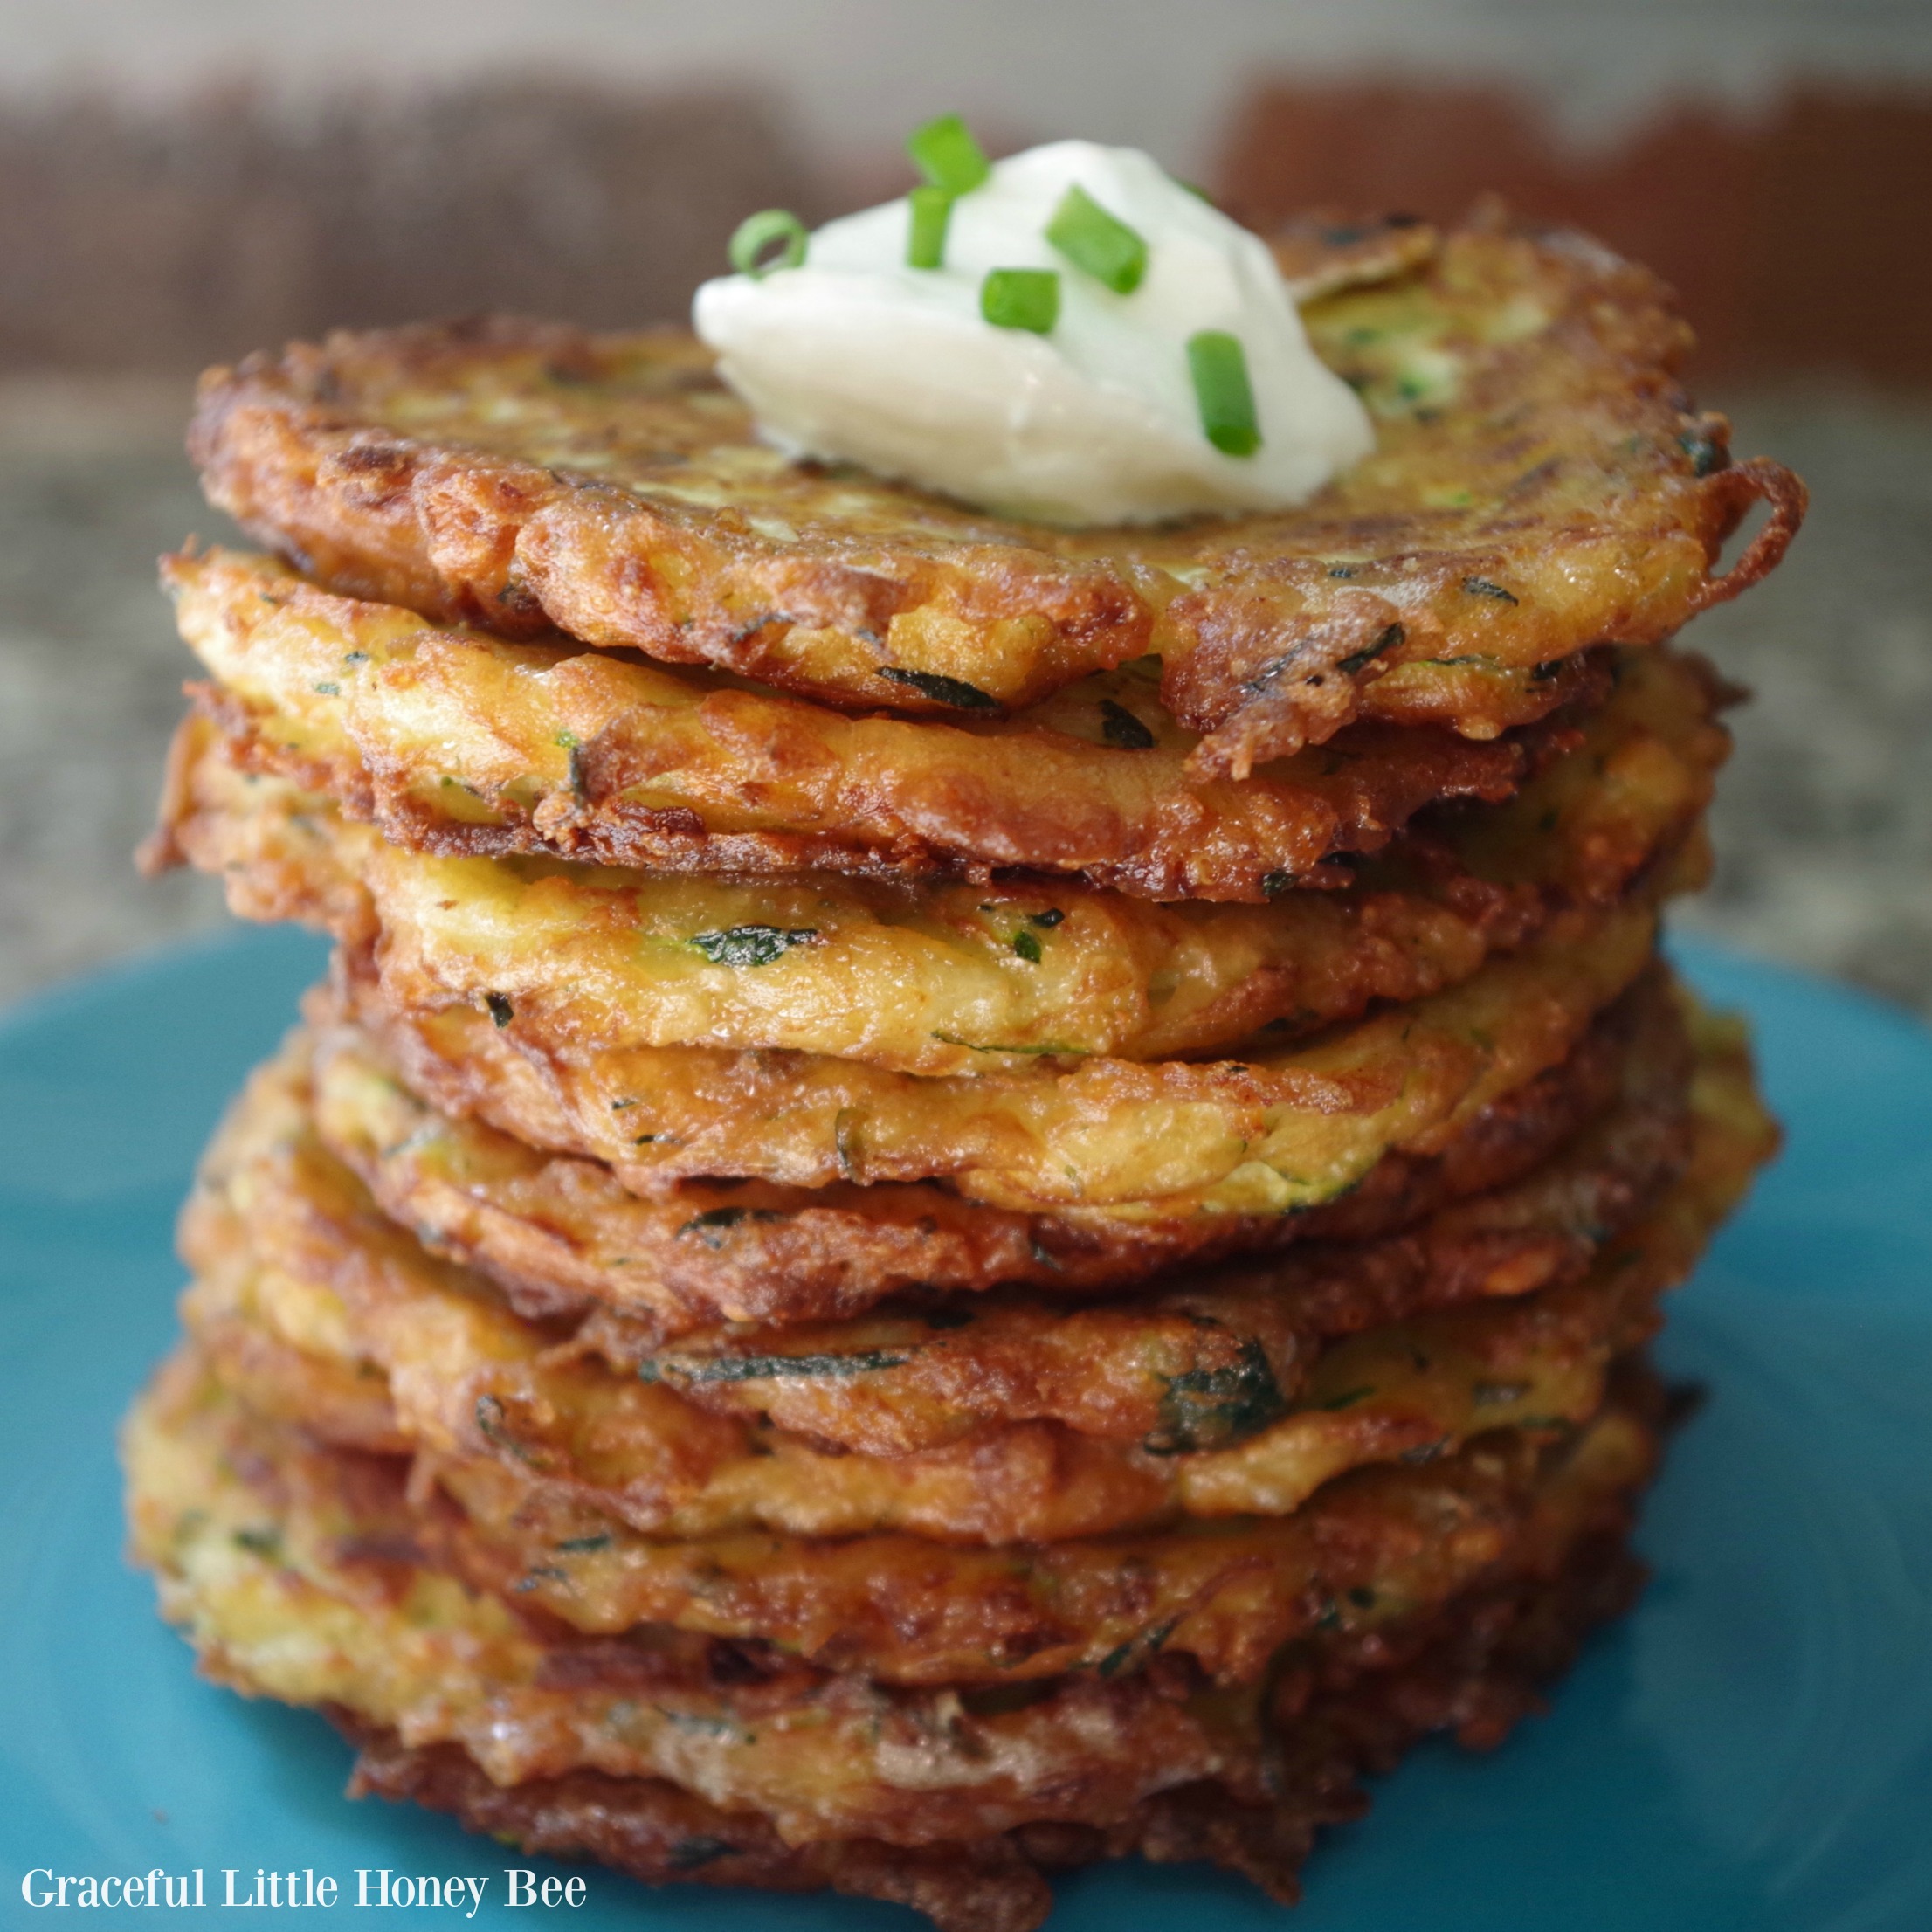 Finished fritters stacked on blue plate with a dollop of sour cream and green onions sprinkled on top.